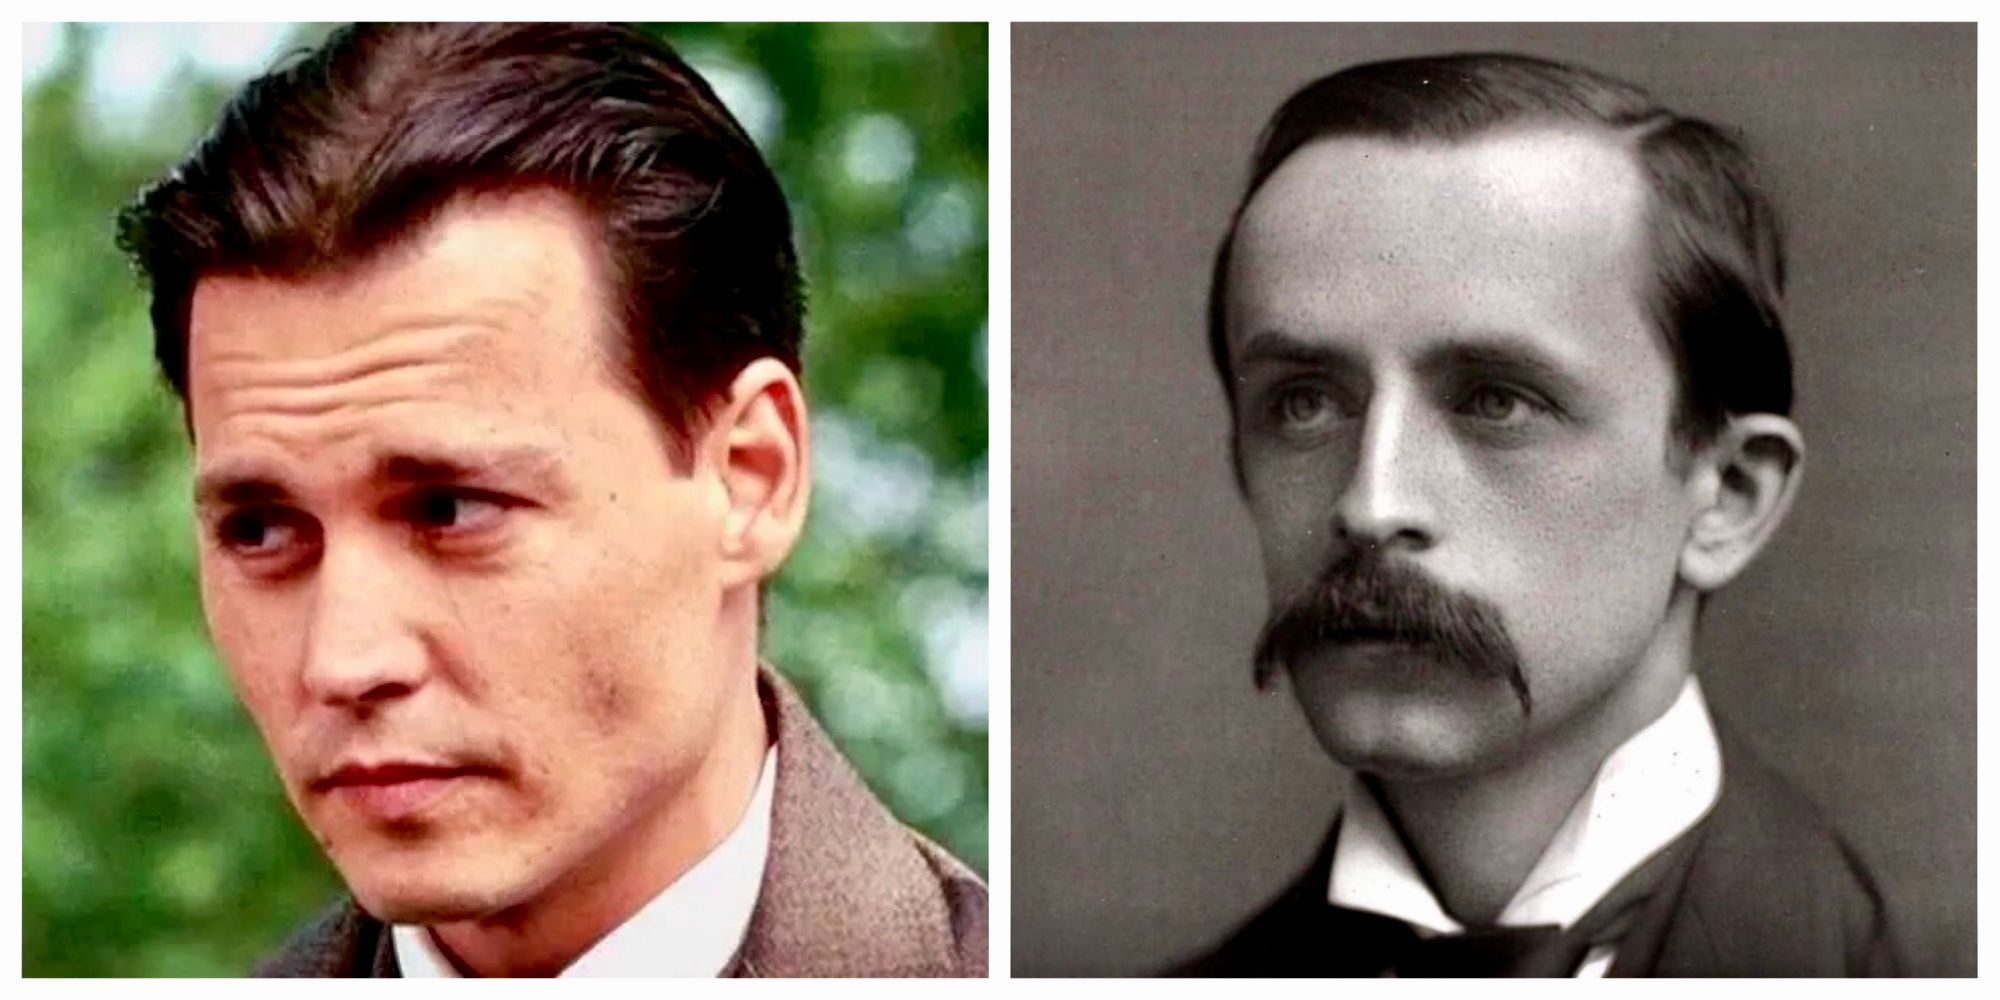 Johnny Depp as J.M. Barrie in Finding Neverland